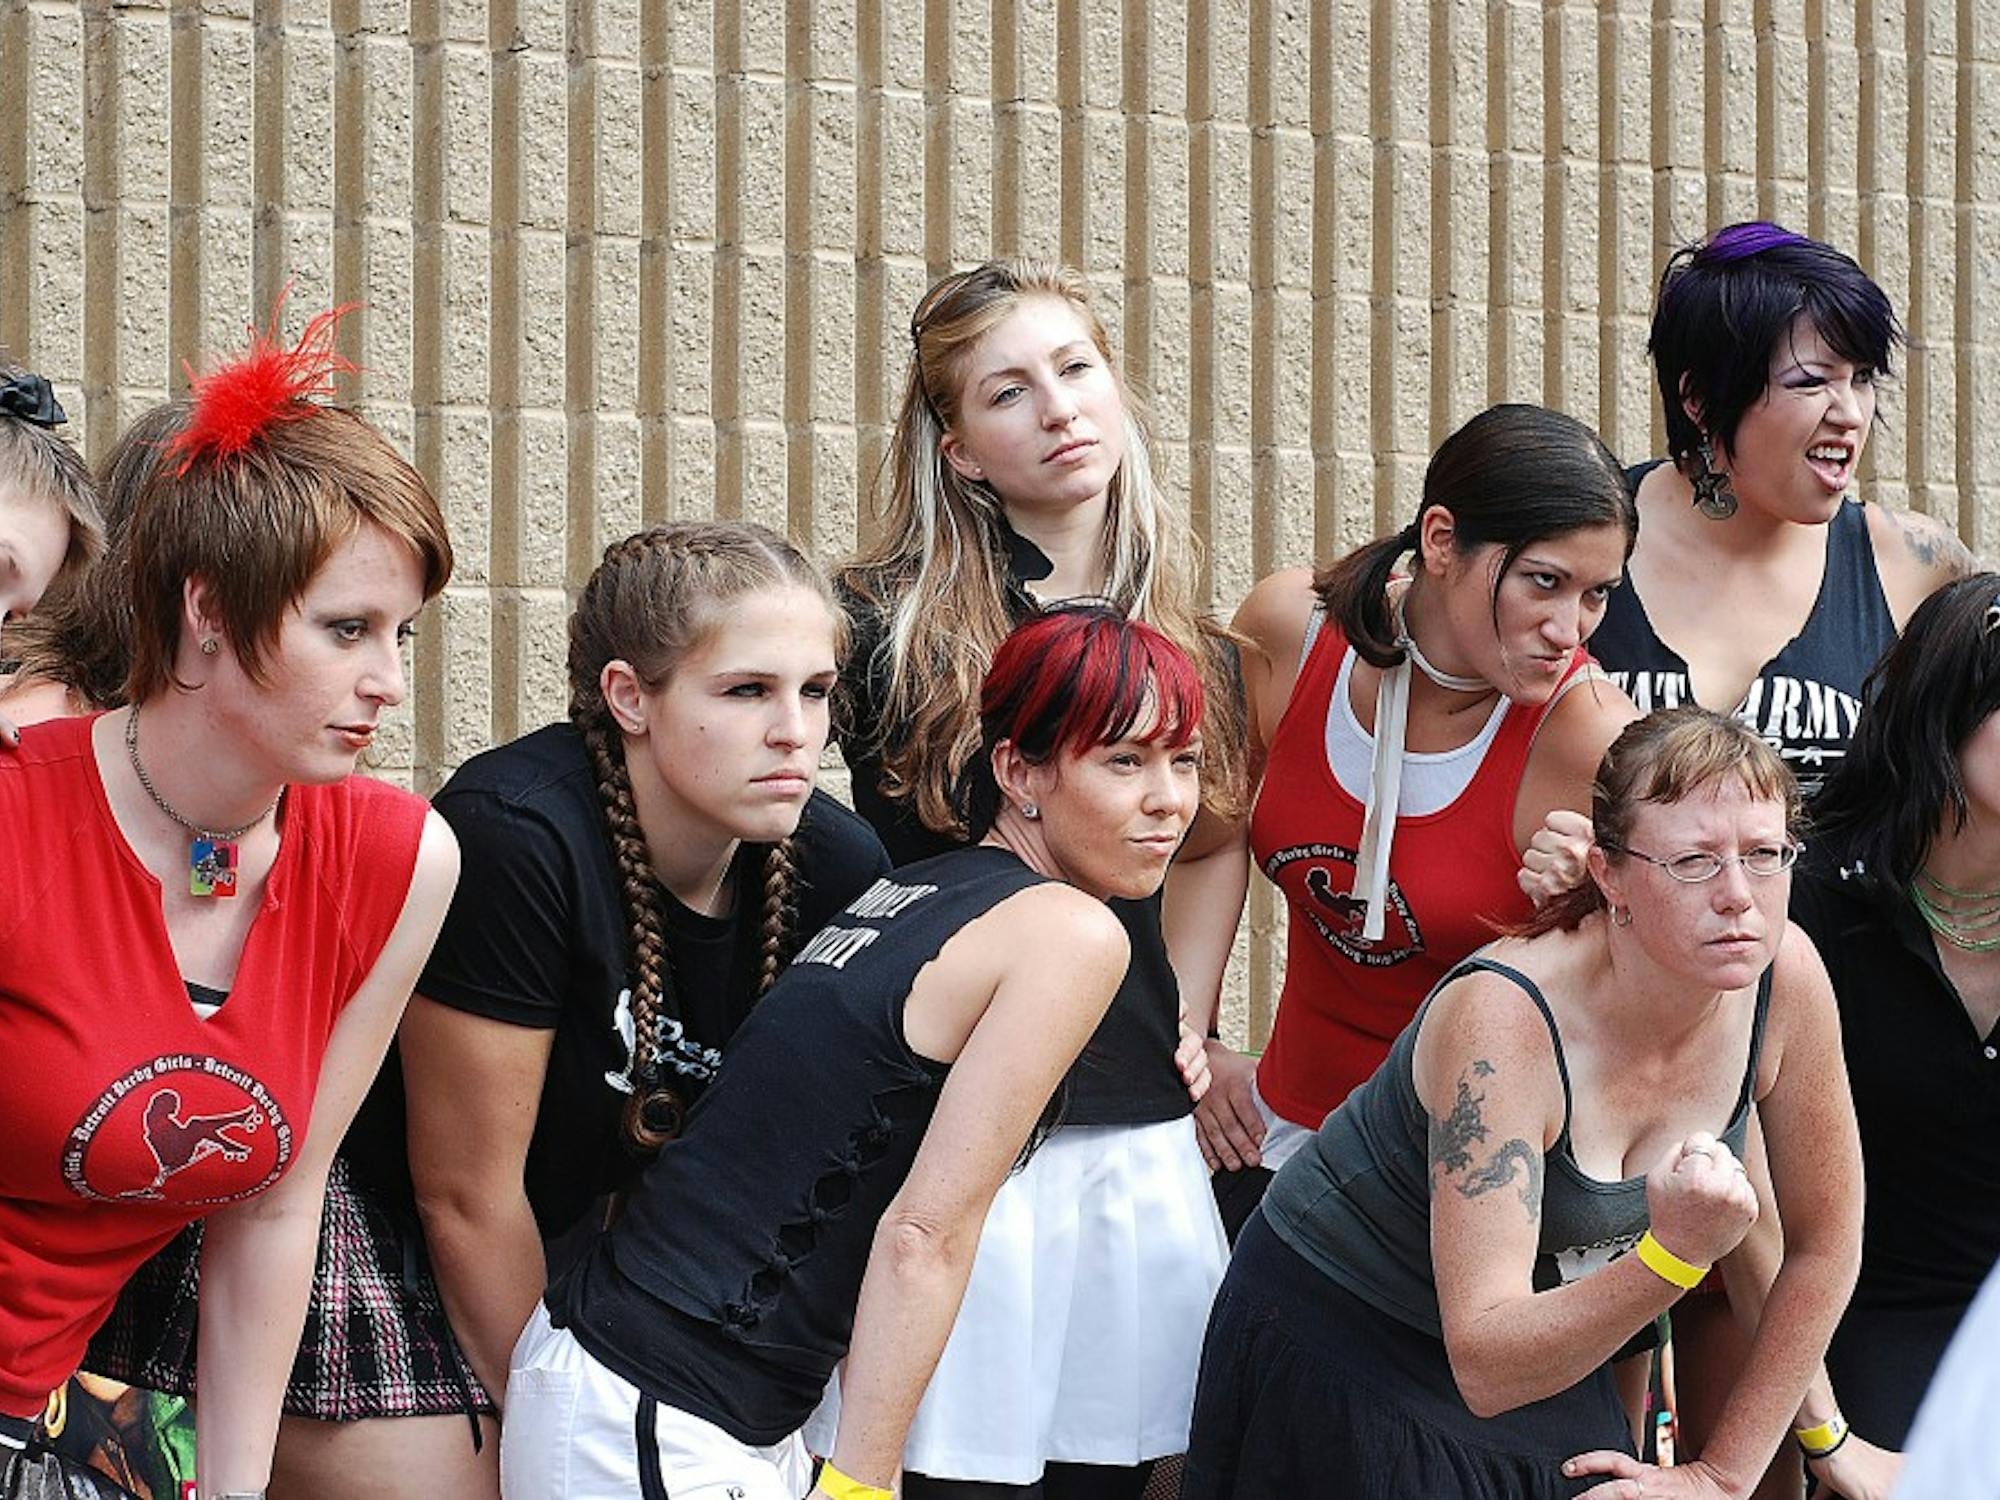 	The Detroit Derby Girls pose for a photo outside of the Bonaventure Skating Rink during a promotion the new movie &#8220;Whip It&#8221;.